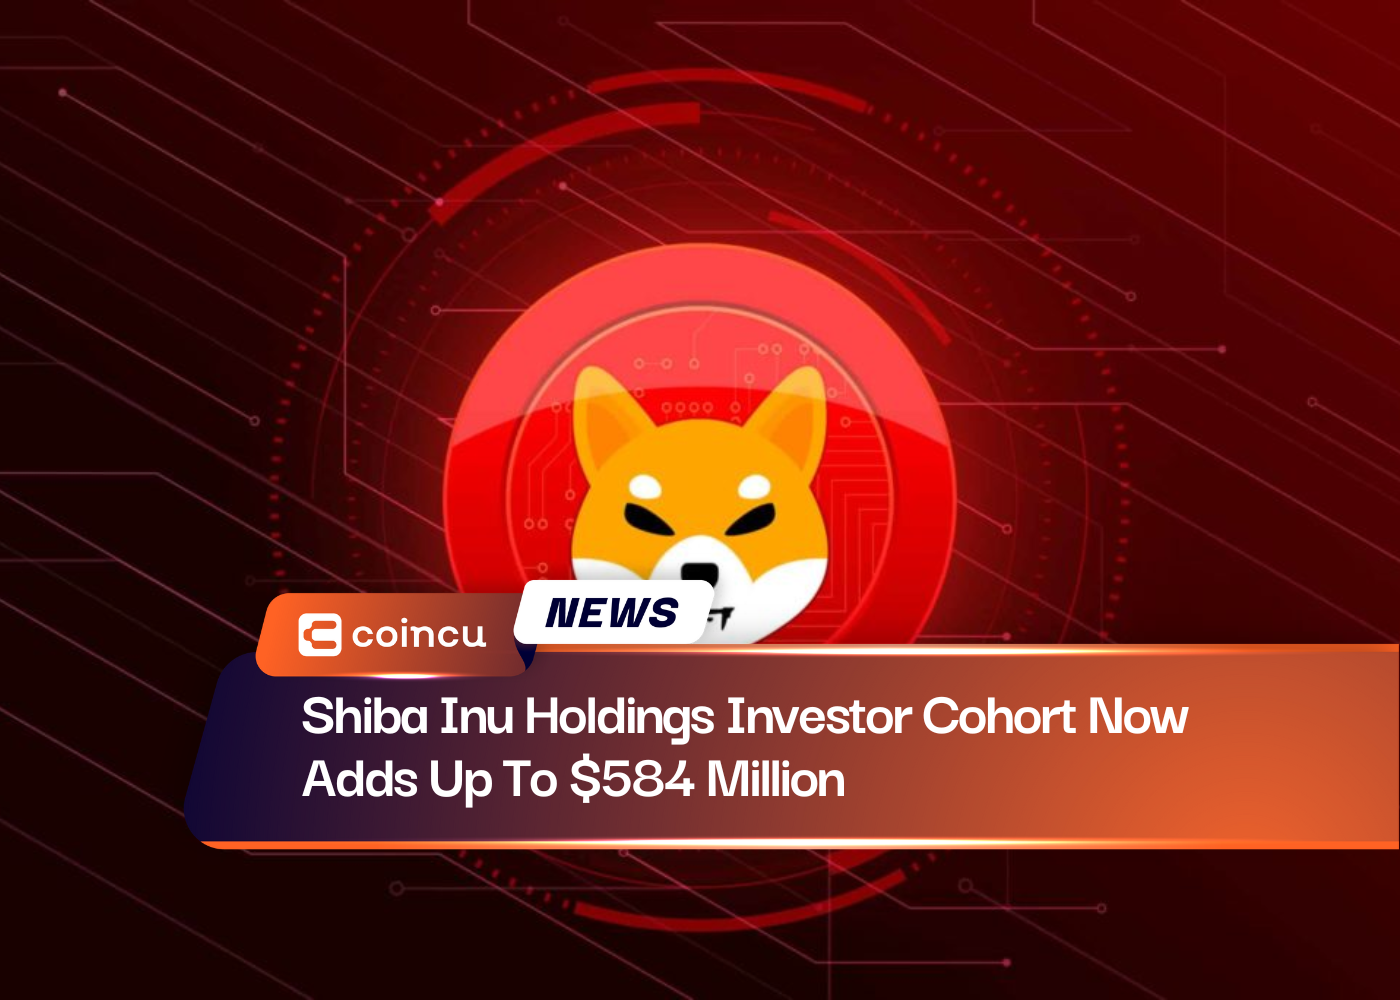 Shiba Inu Holdings Investor Cohort Now Adds Up To $584 Million